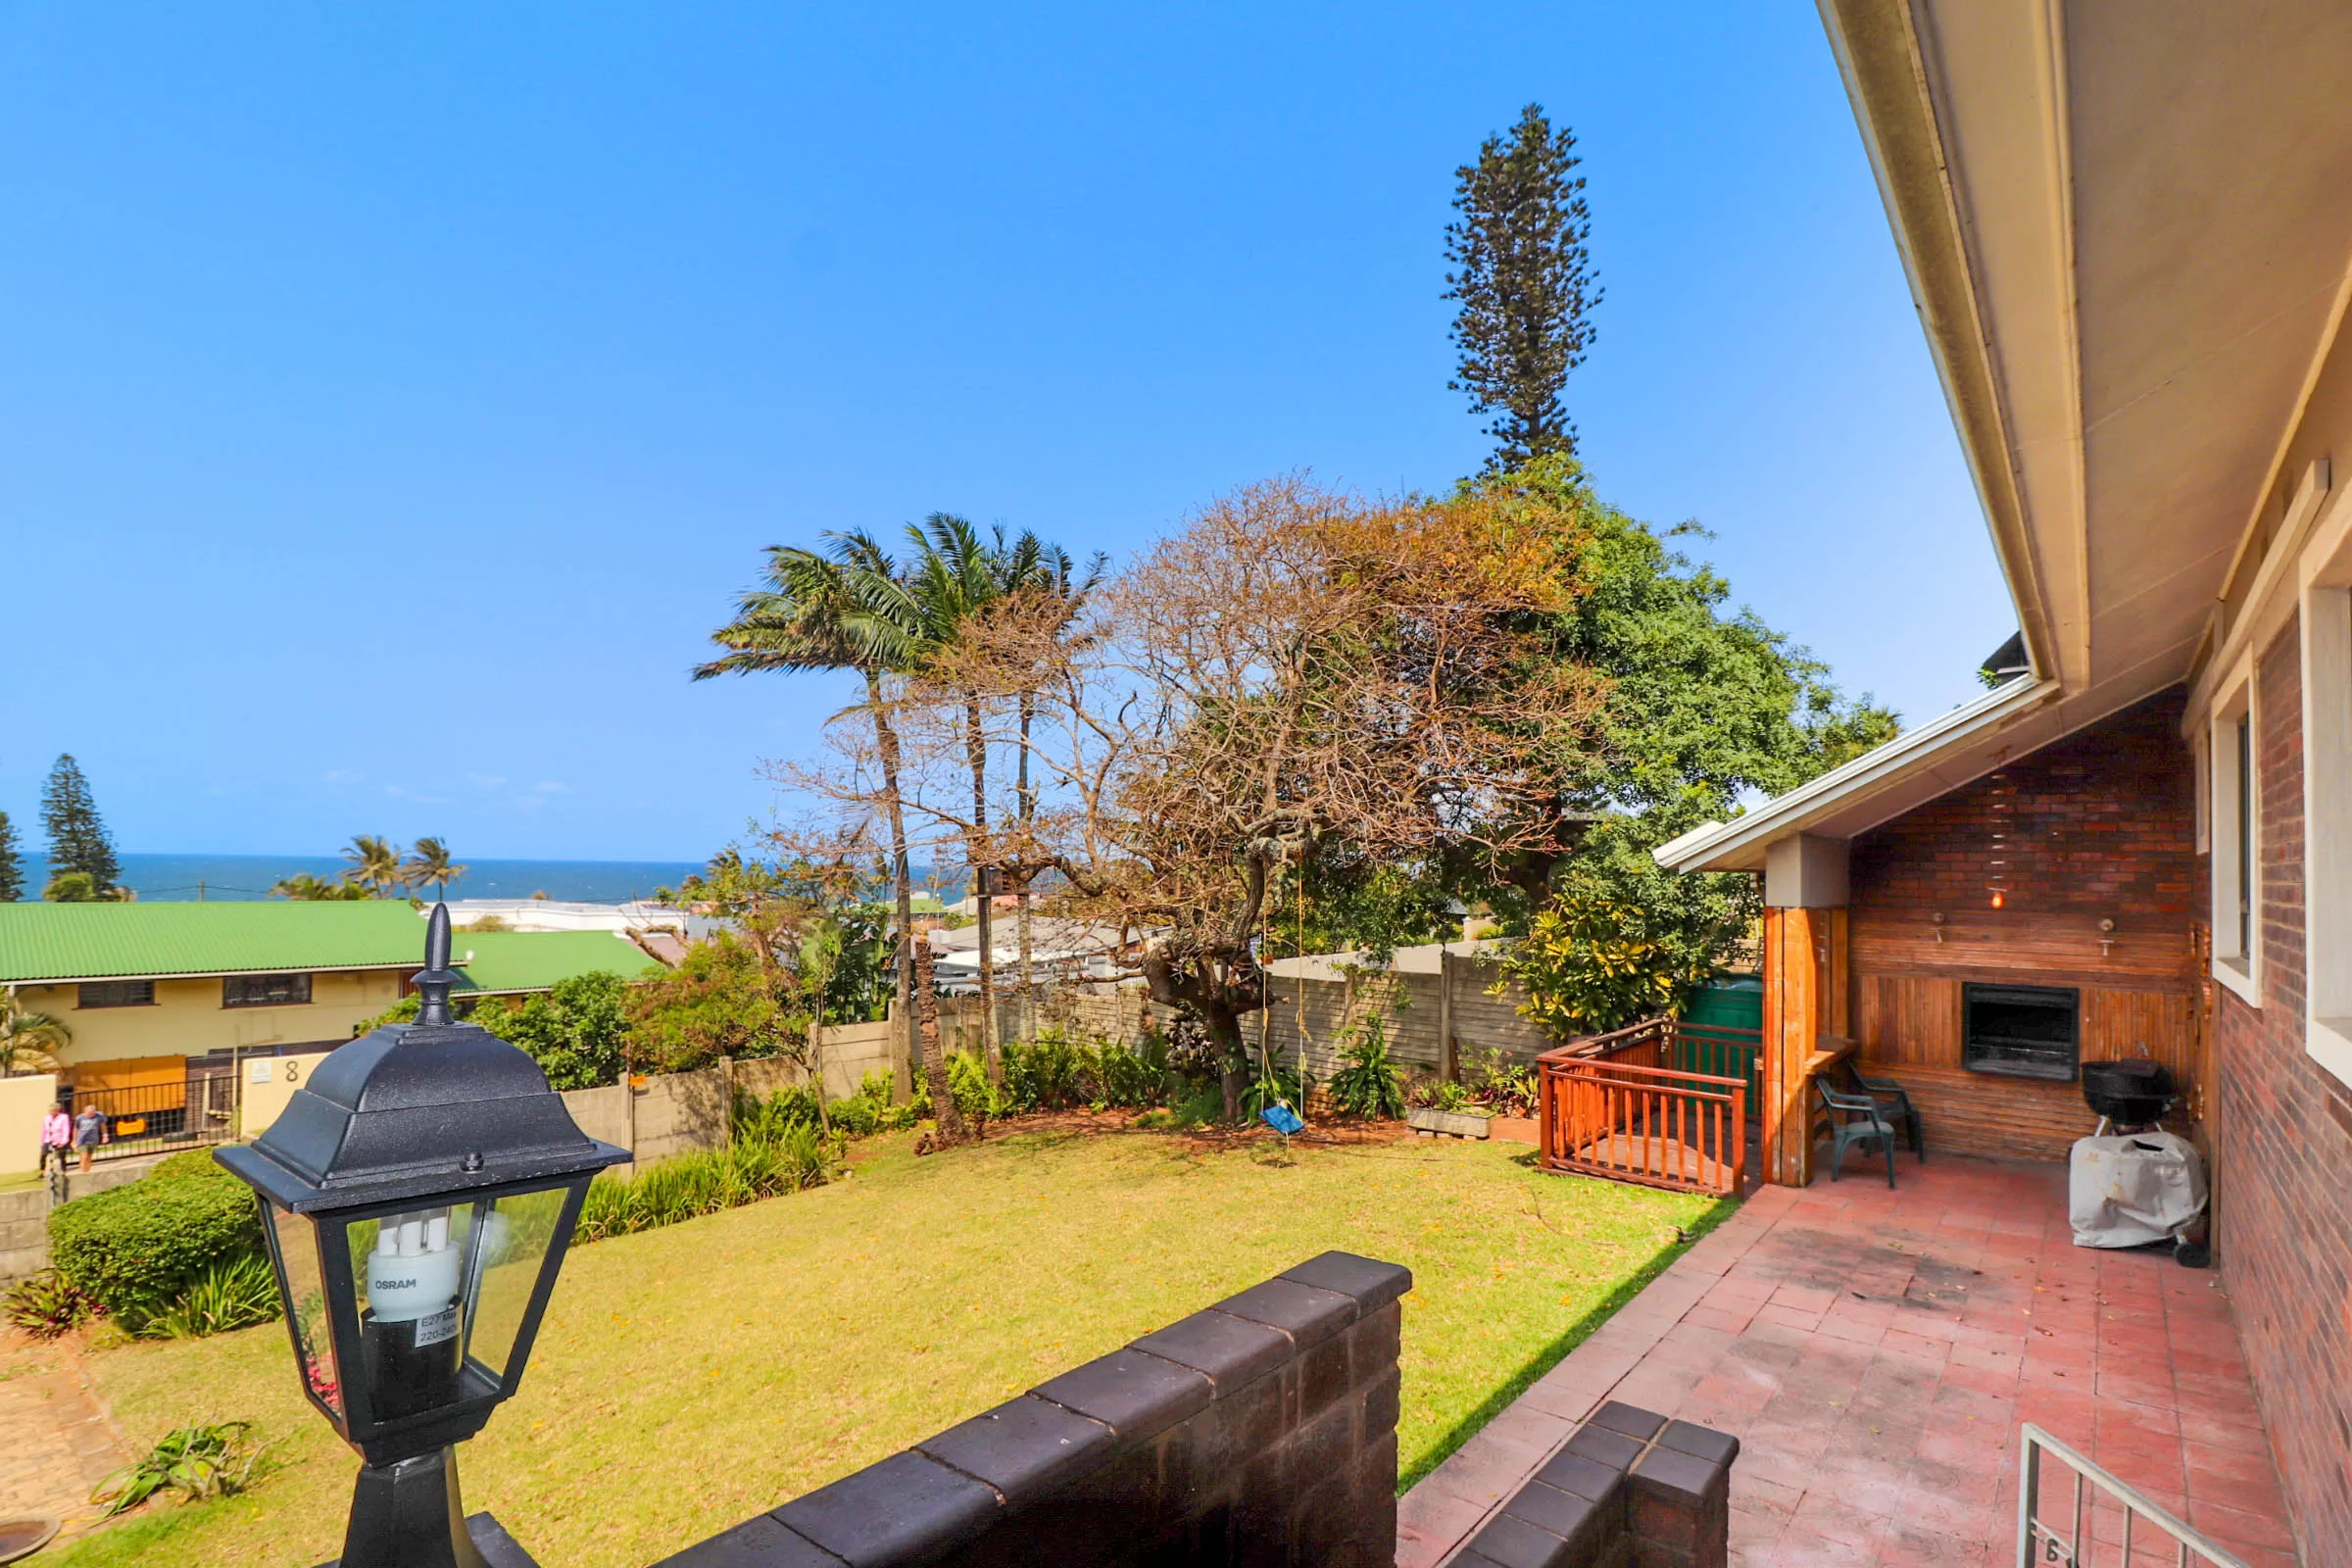 7 Sands Accommmodation in Ballito